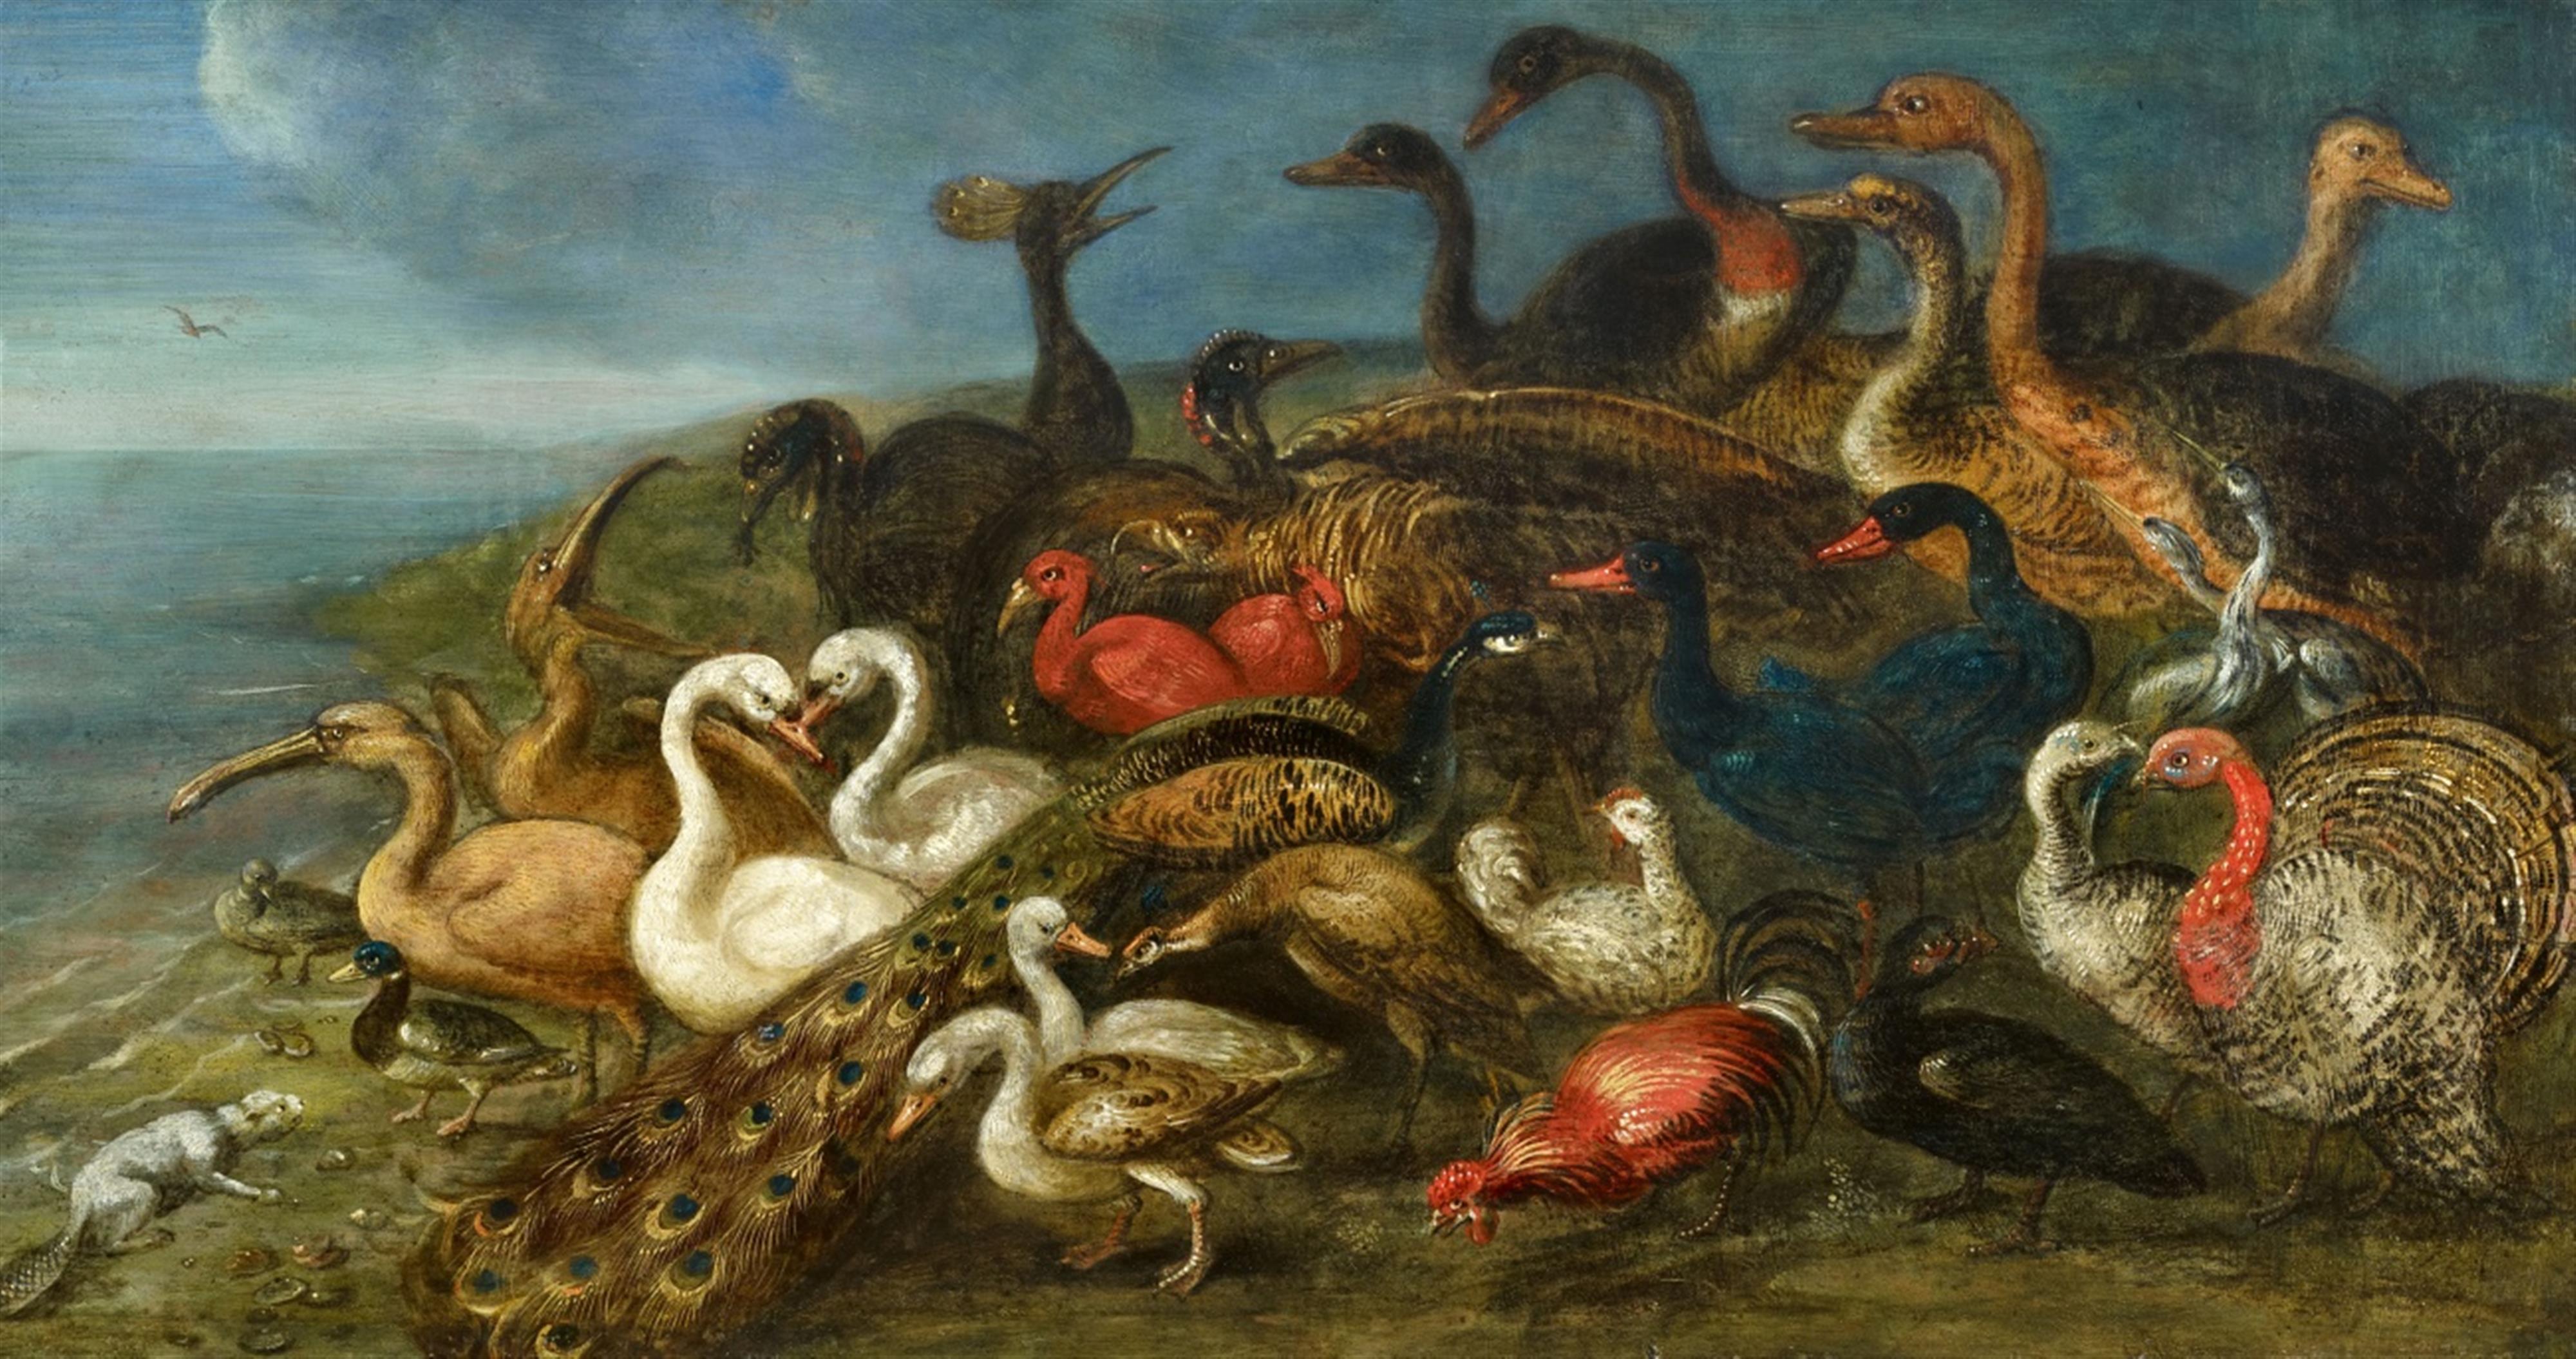 Flemish School, 17th century - Ducks, Geese, a Peacock, and Other Birds by the Seashore - image-1